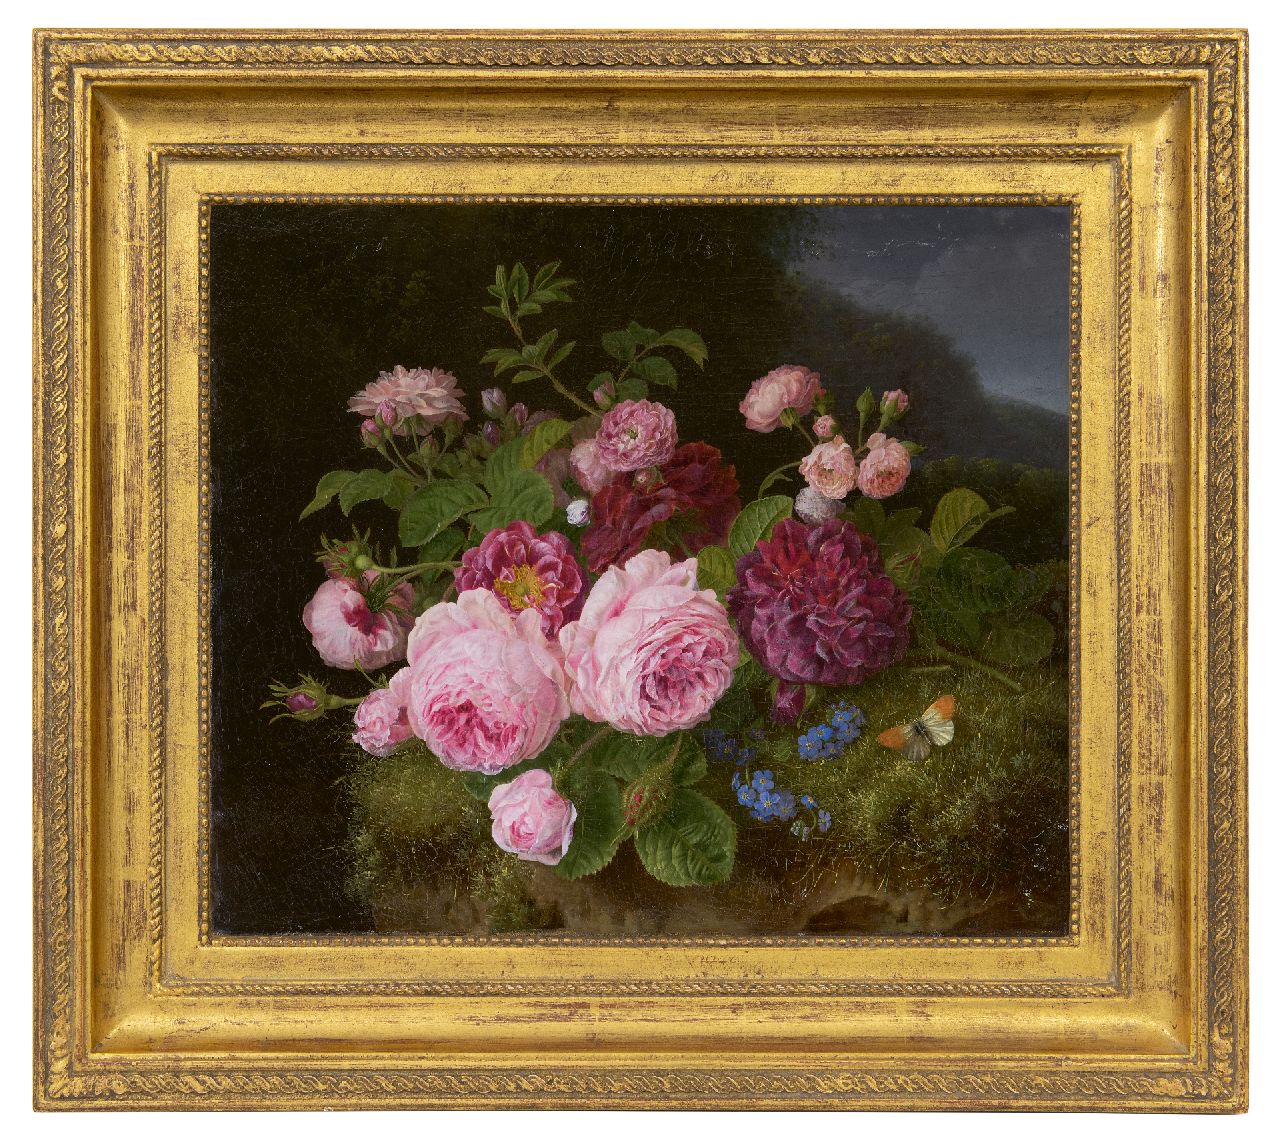 Knip H.G.  | 'Henriëtte' Geertruida Knip | Paintings offered for sale | Roses on the forest soil, oil on canvas 36.3 x 42.7 cm